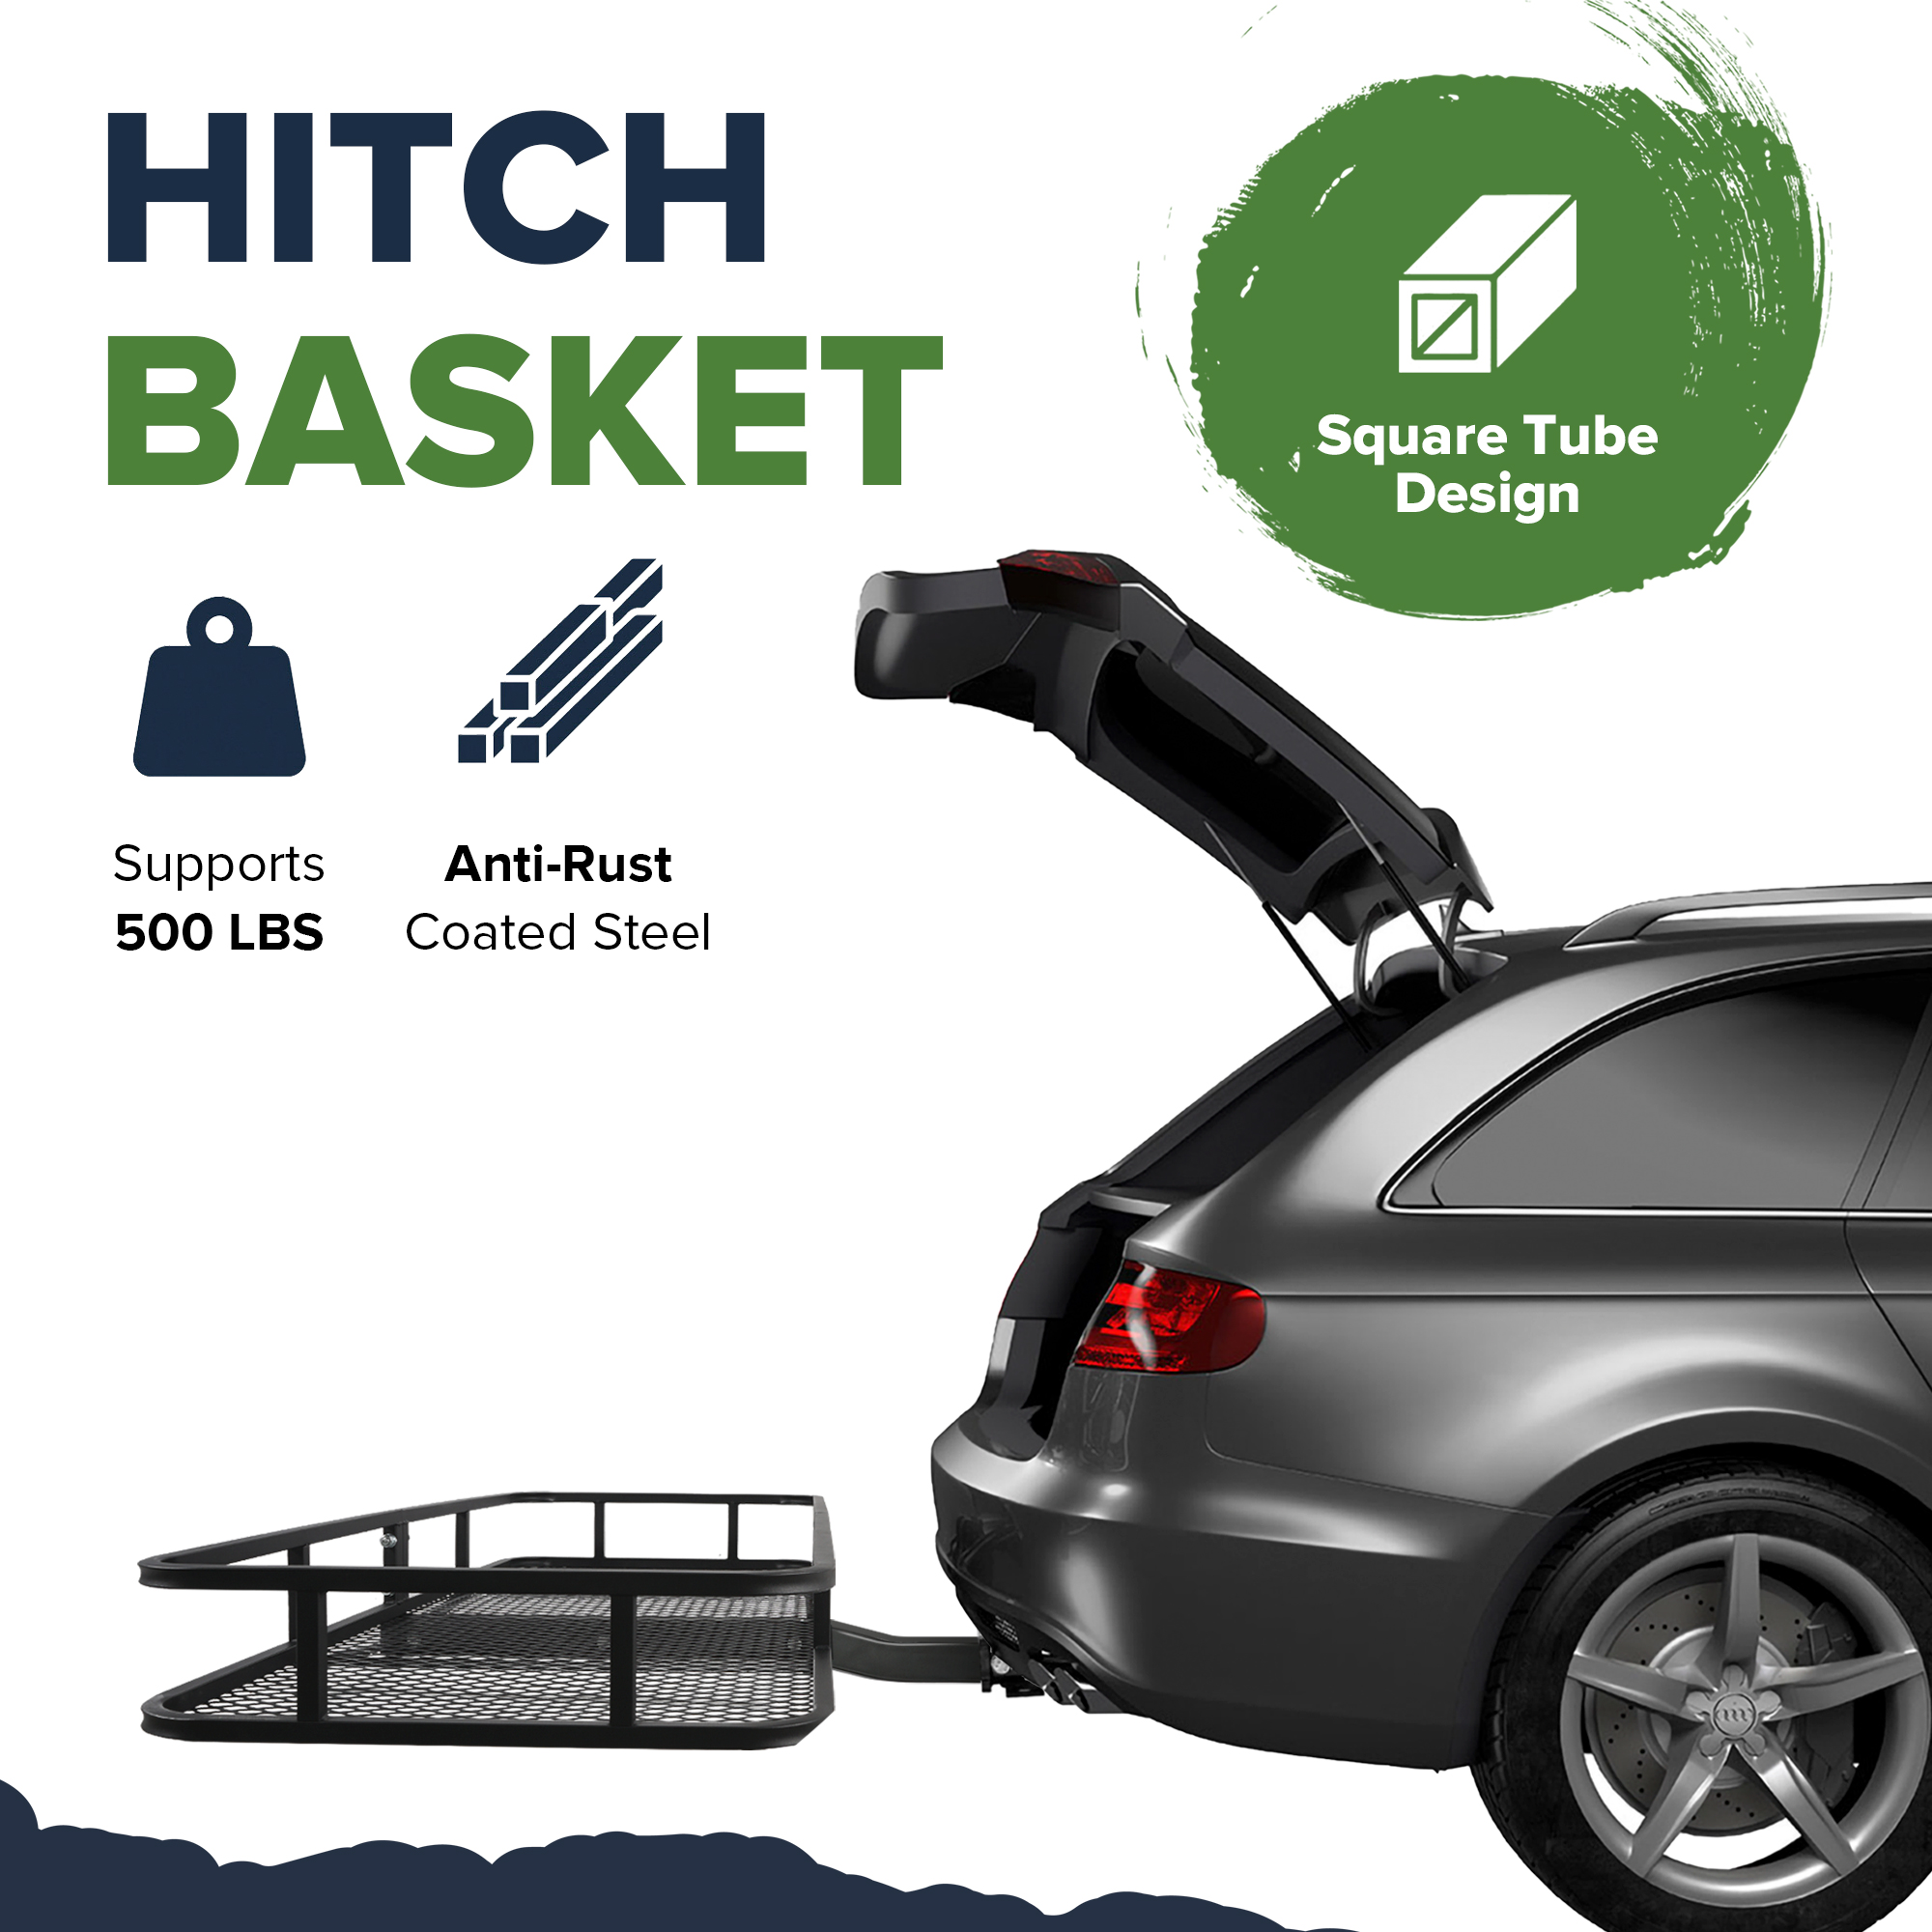 ARKSEN 60" x 20" x 6" Angled Shank Hitch Mount Cargo Carrier Luggage Basket Fit 2" Receiver, 500LBS Capacity, With Updated 500D PVC Waterproof Cargo Bag with Reinforced Straps, Black - image 3 of 6